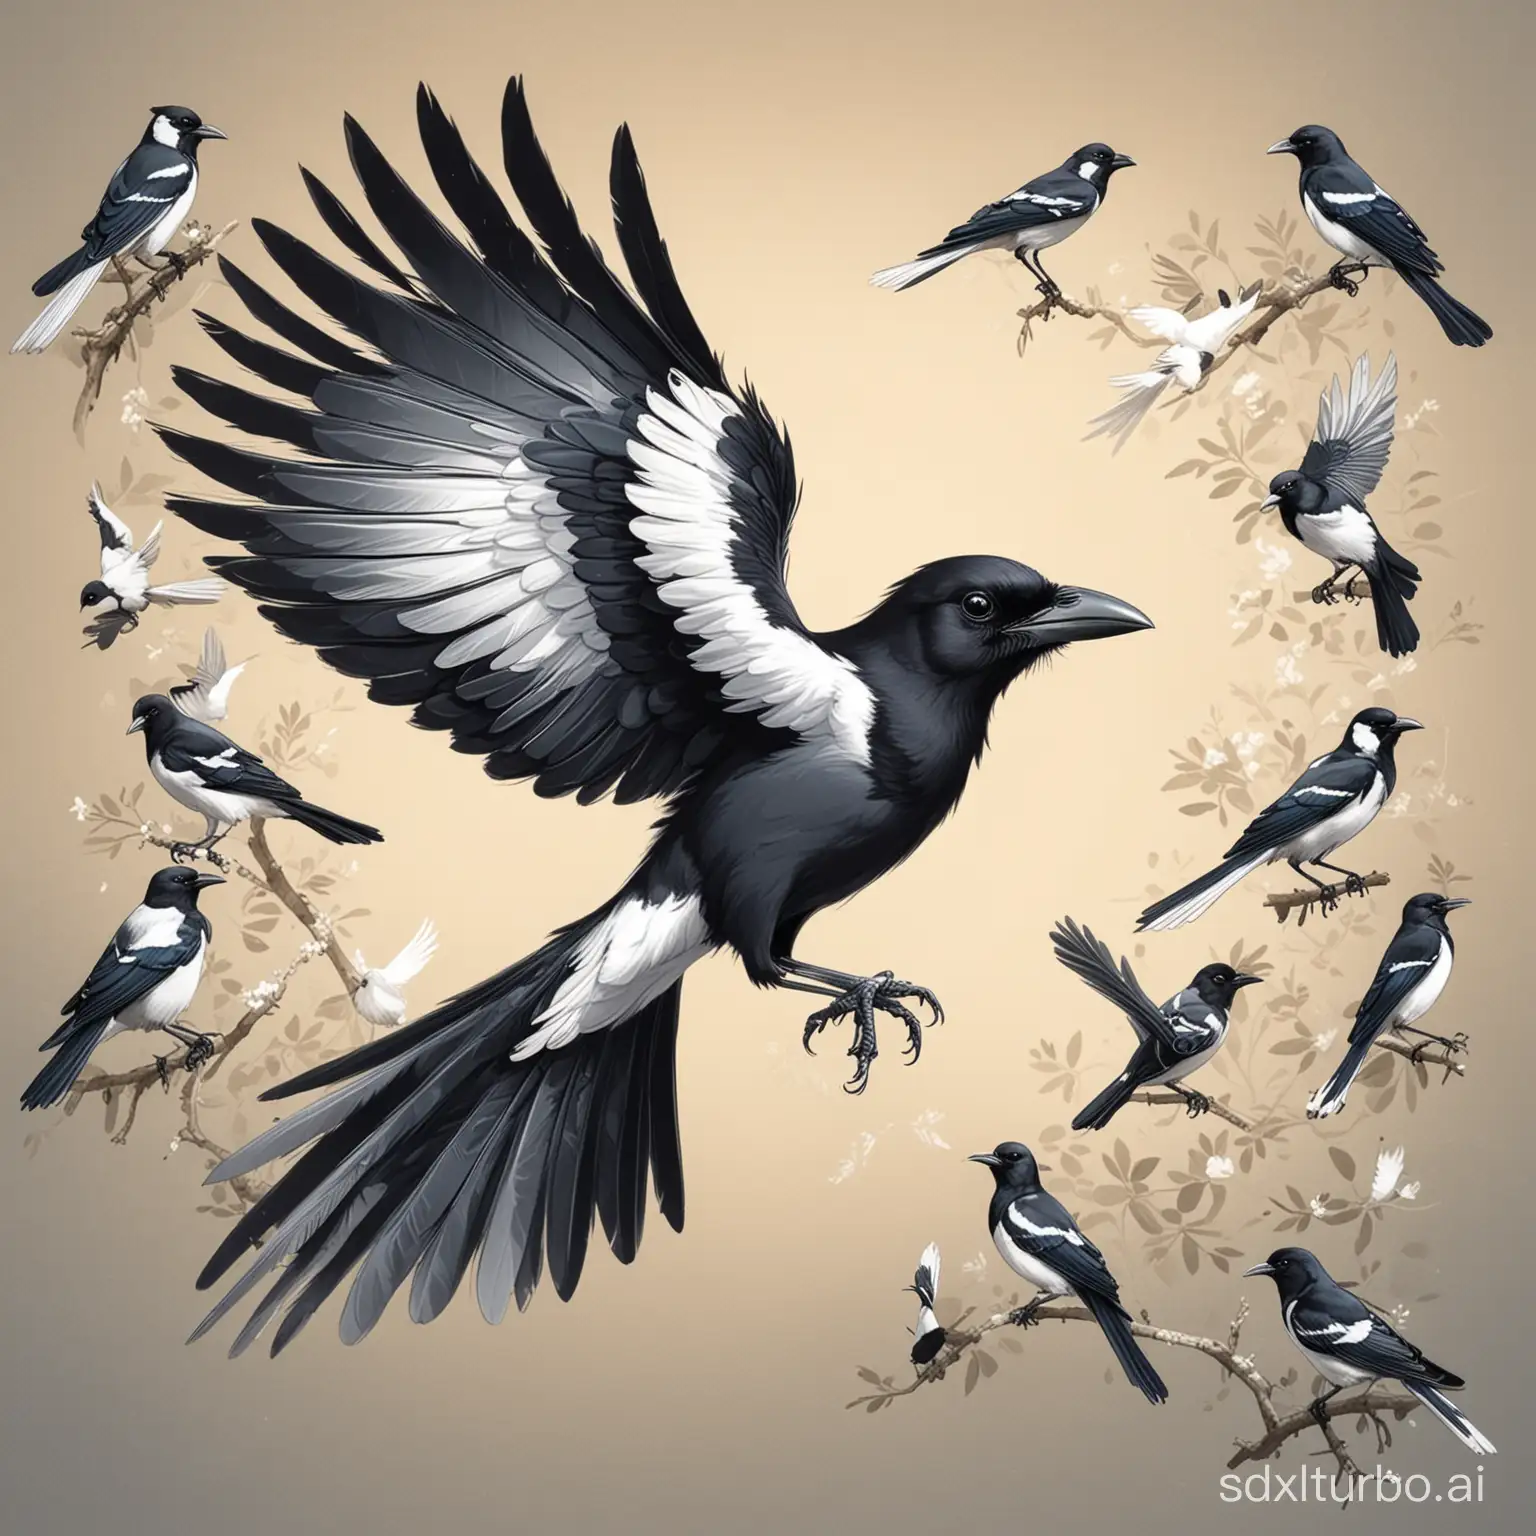 Cartoon-style Illustration of Magpies Cartoon-style Illustration of a Magpie "Generate different orientations for each photo"